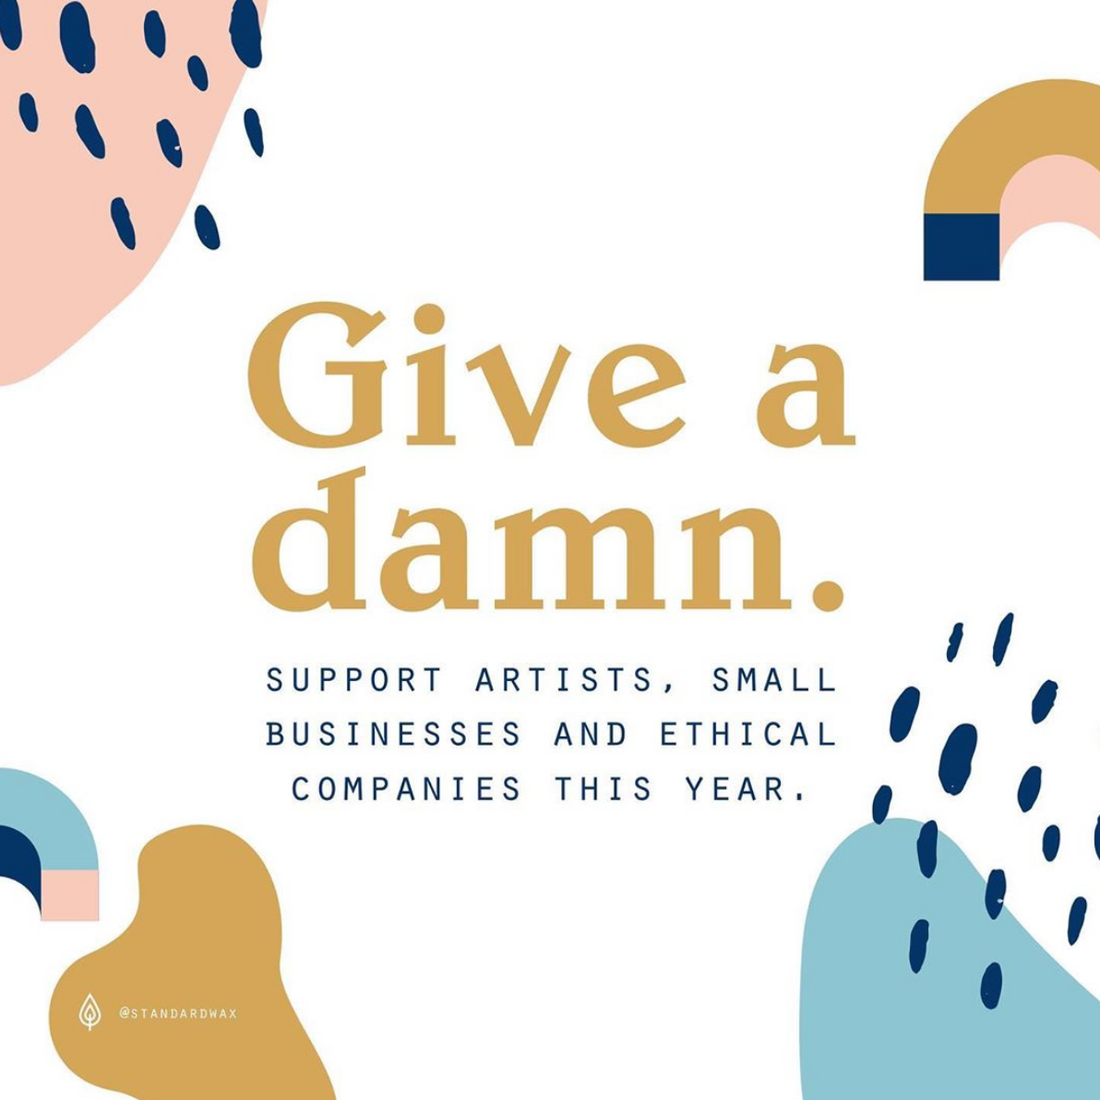 Give a damn: why it's important to support good people.